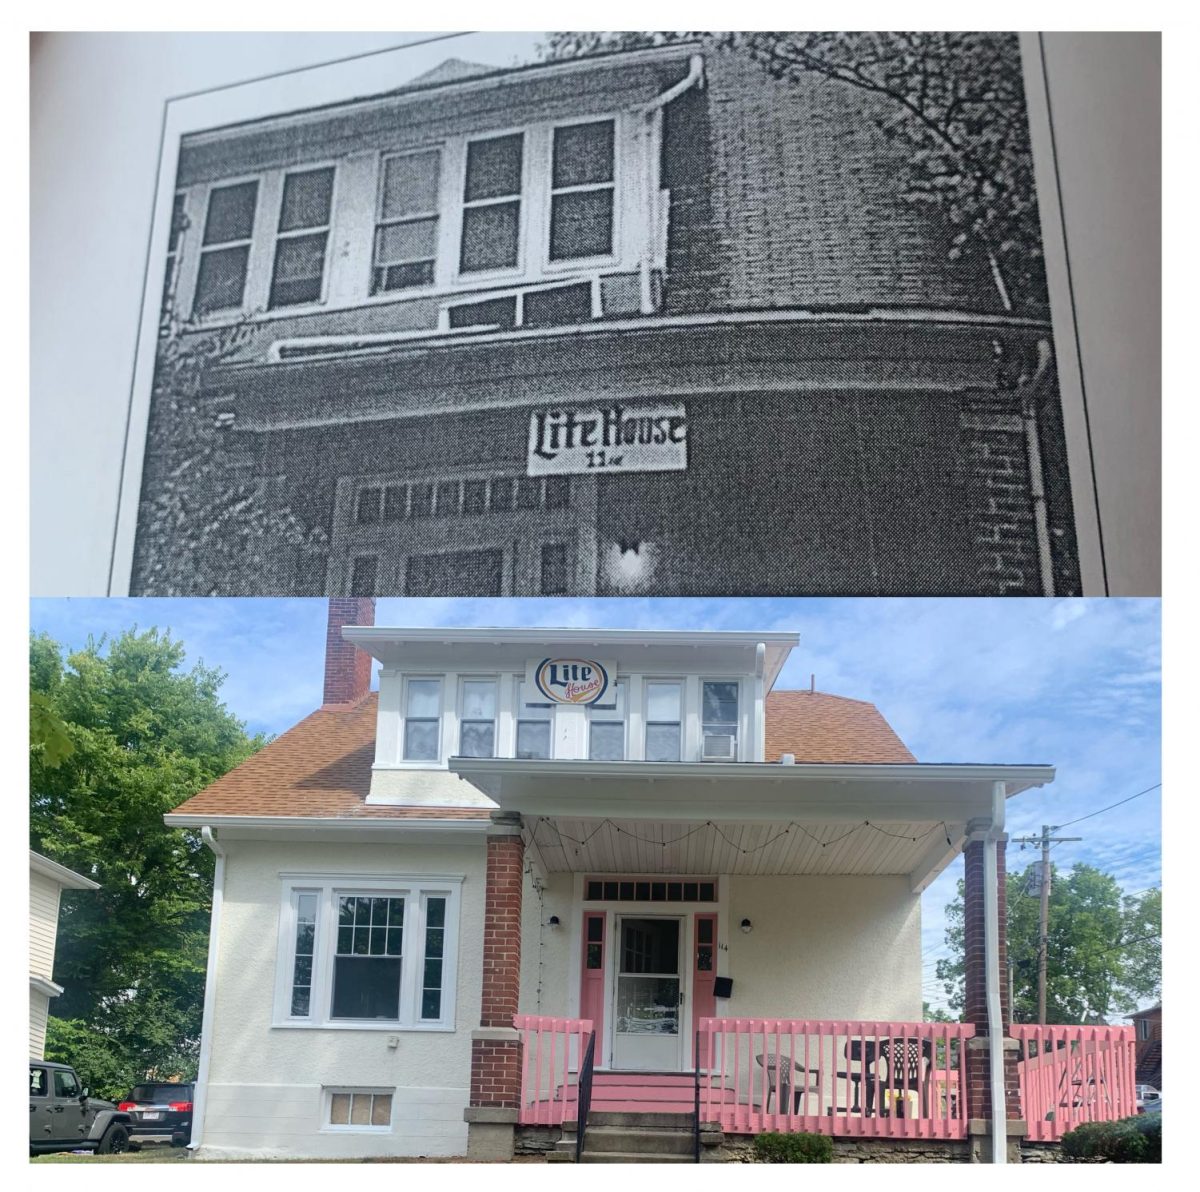 “Lite House,” located at 114 E. Collins, was originally named by members of the sorority Delta Gamma and passed down, according to “Please Sign In.” The front of the house has seen some remodeling over the years and the sign has been updated, but the name has stuck.